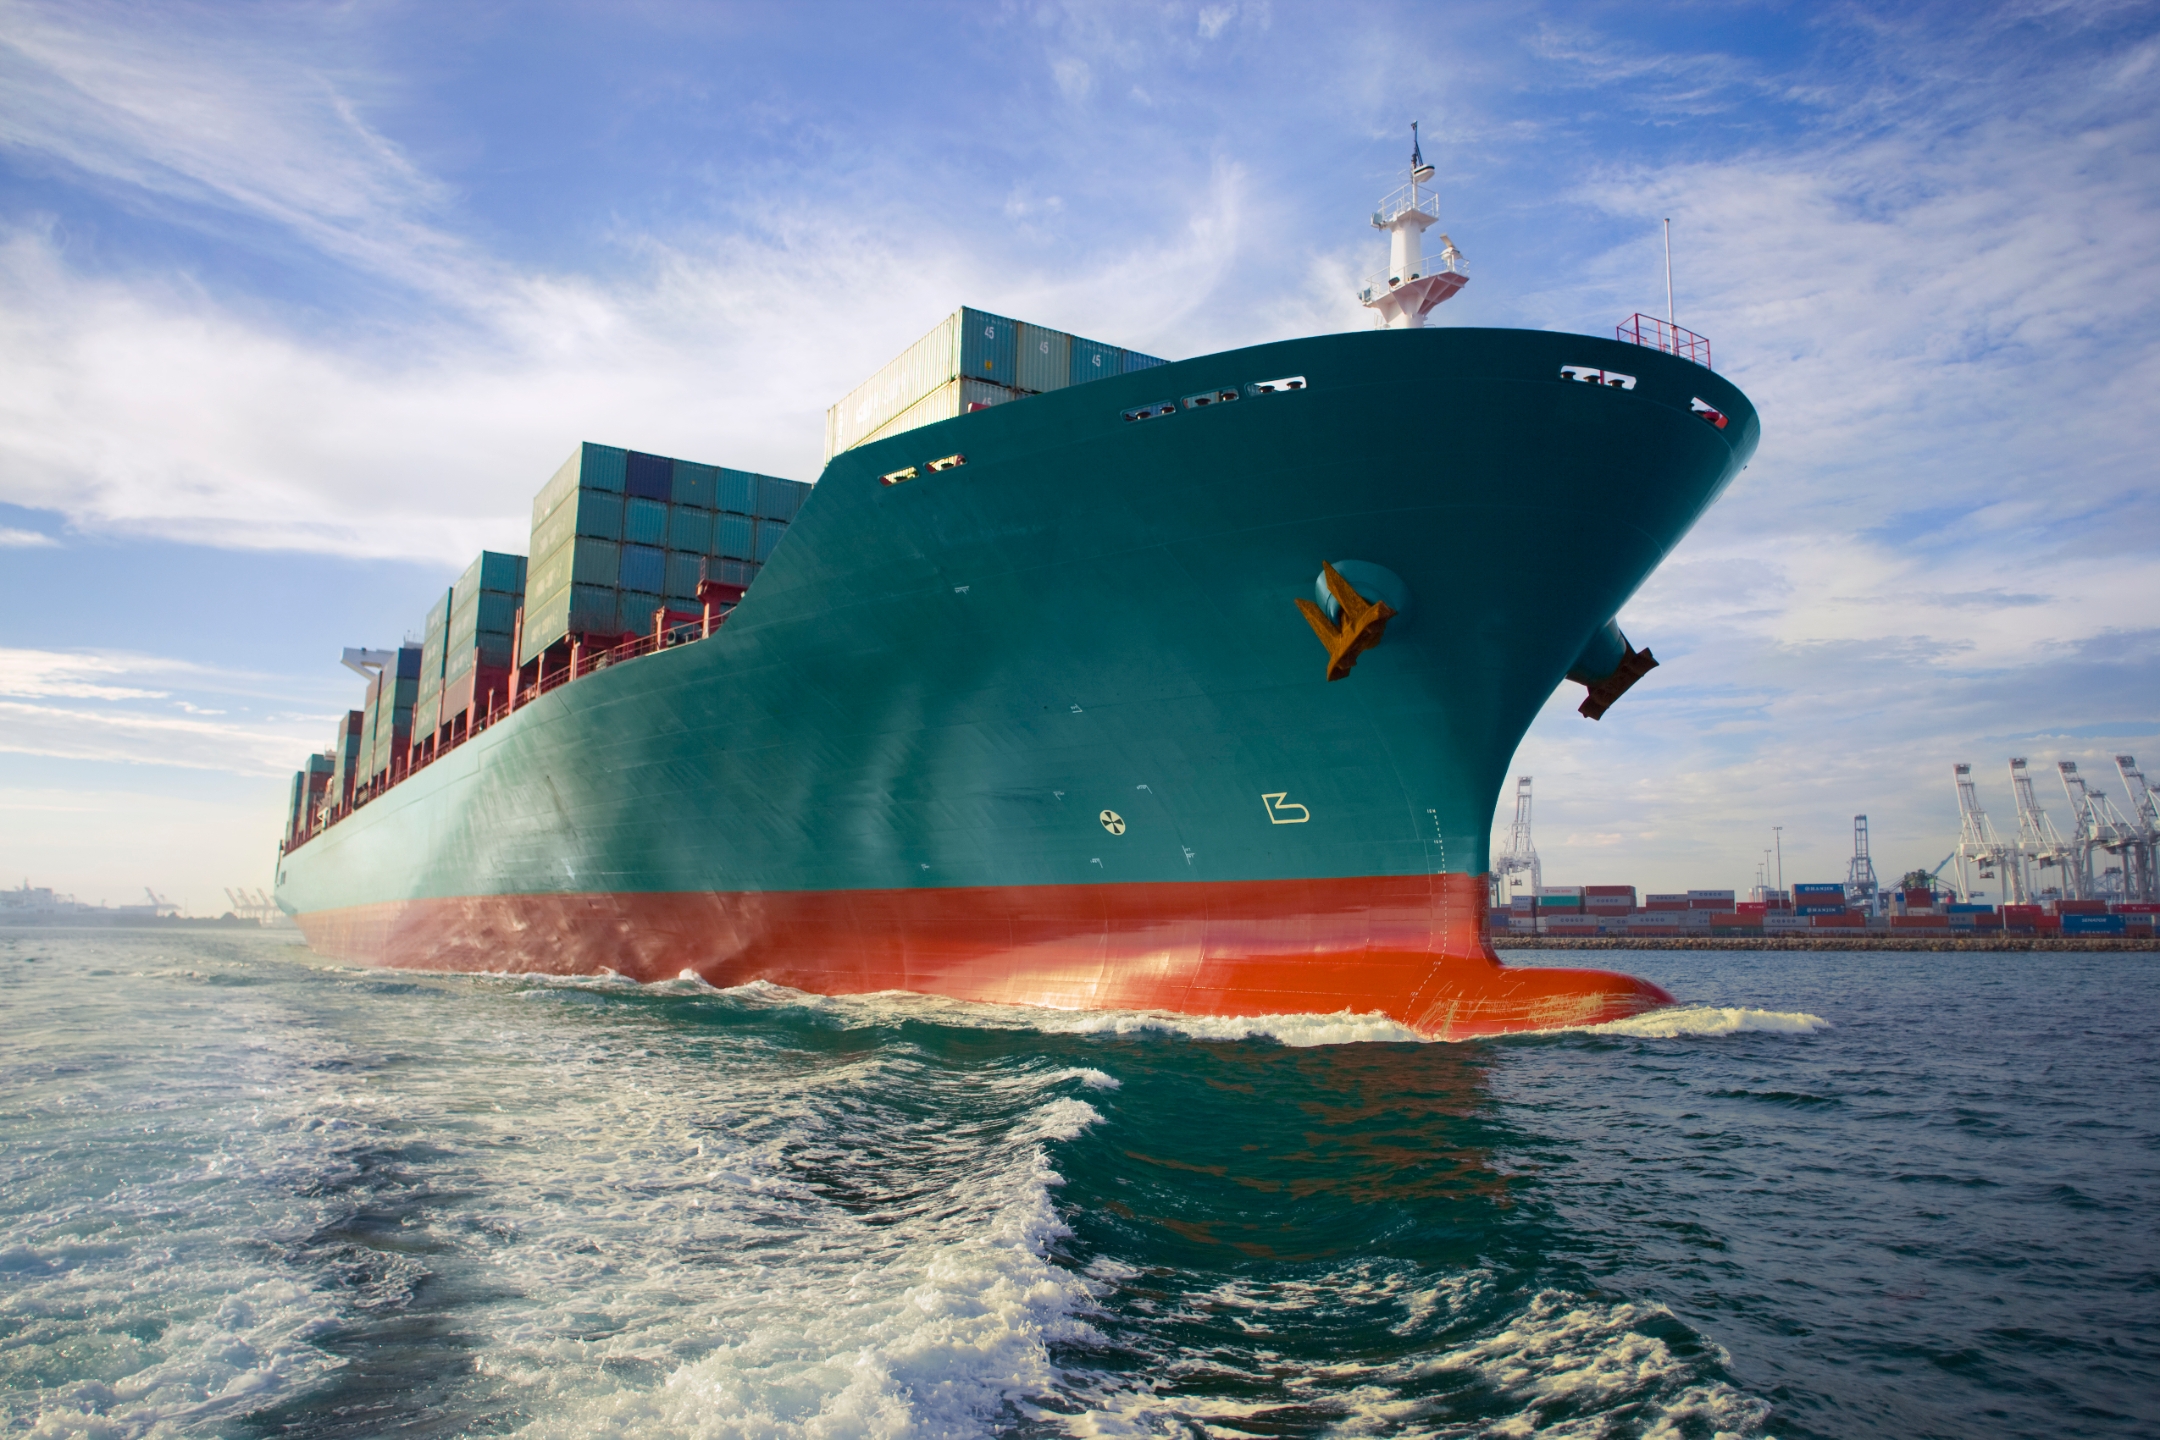 The bow-view of a blue-green cargo ship sailing out of a port.